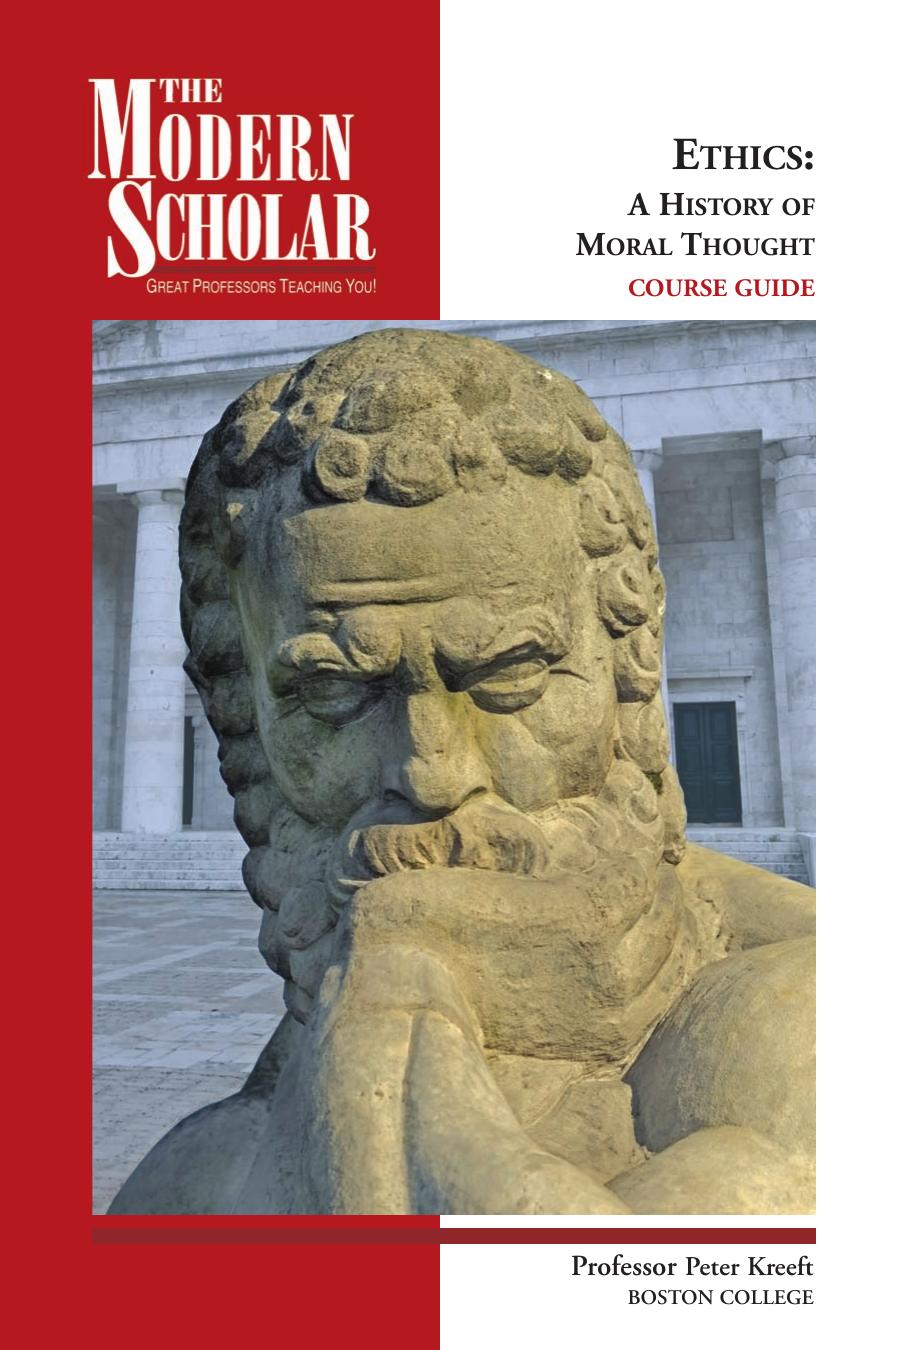 The Modern Scholar - Ethics: A History of Thought (Audio Book)